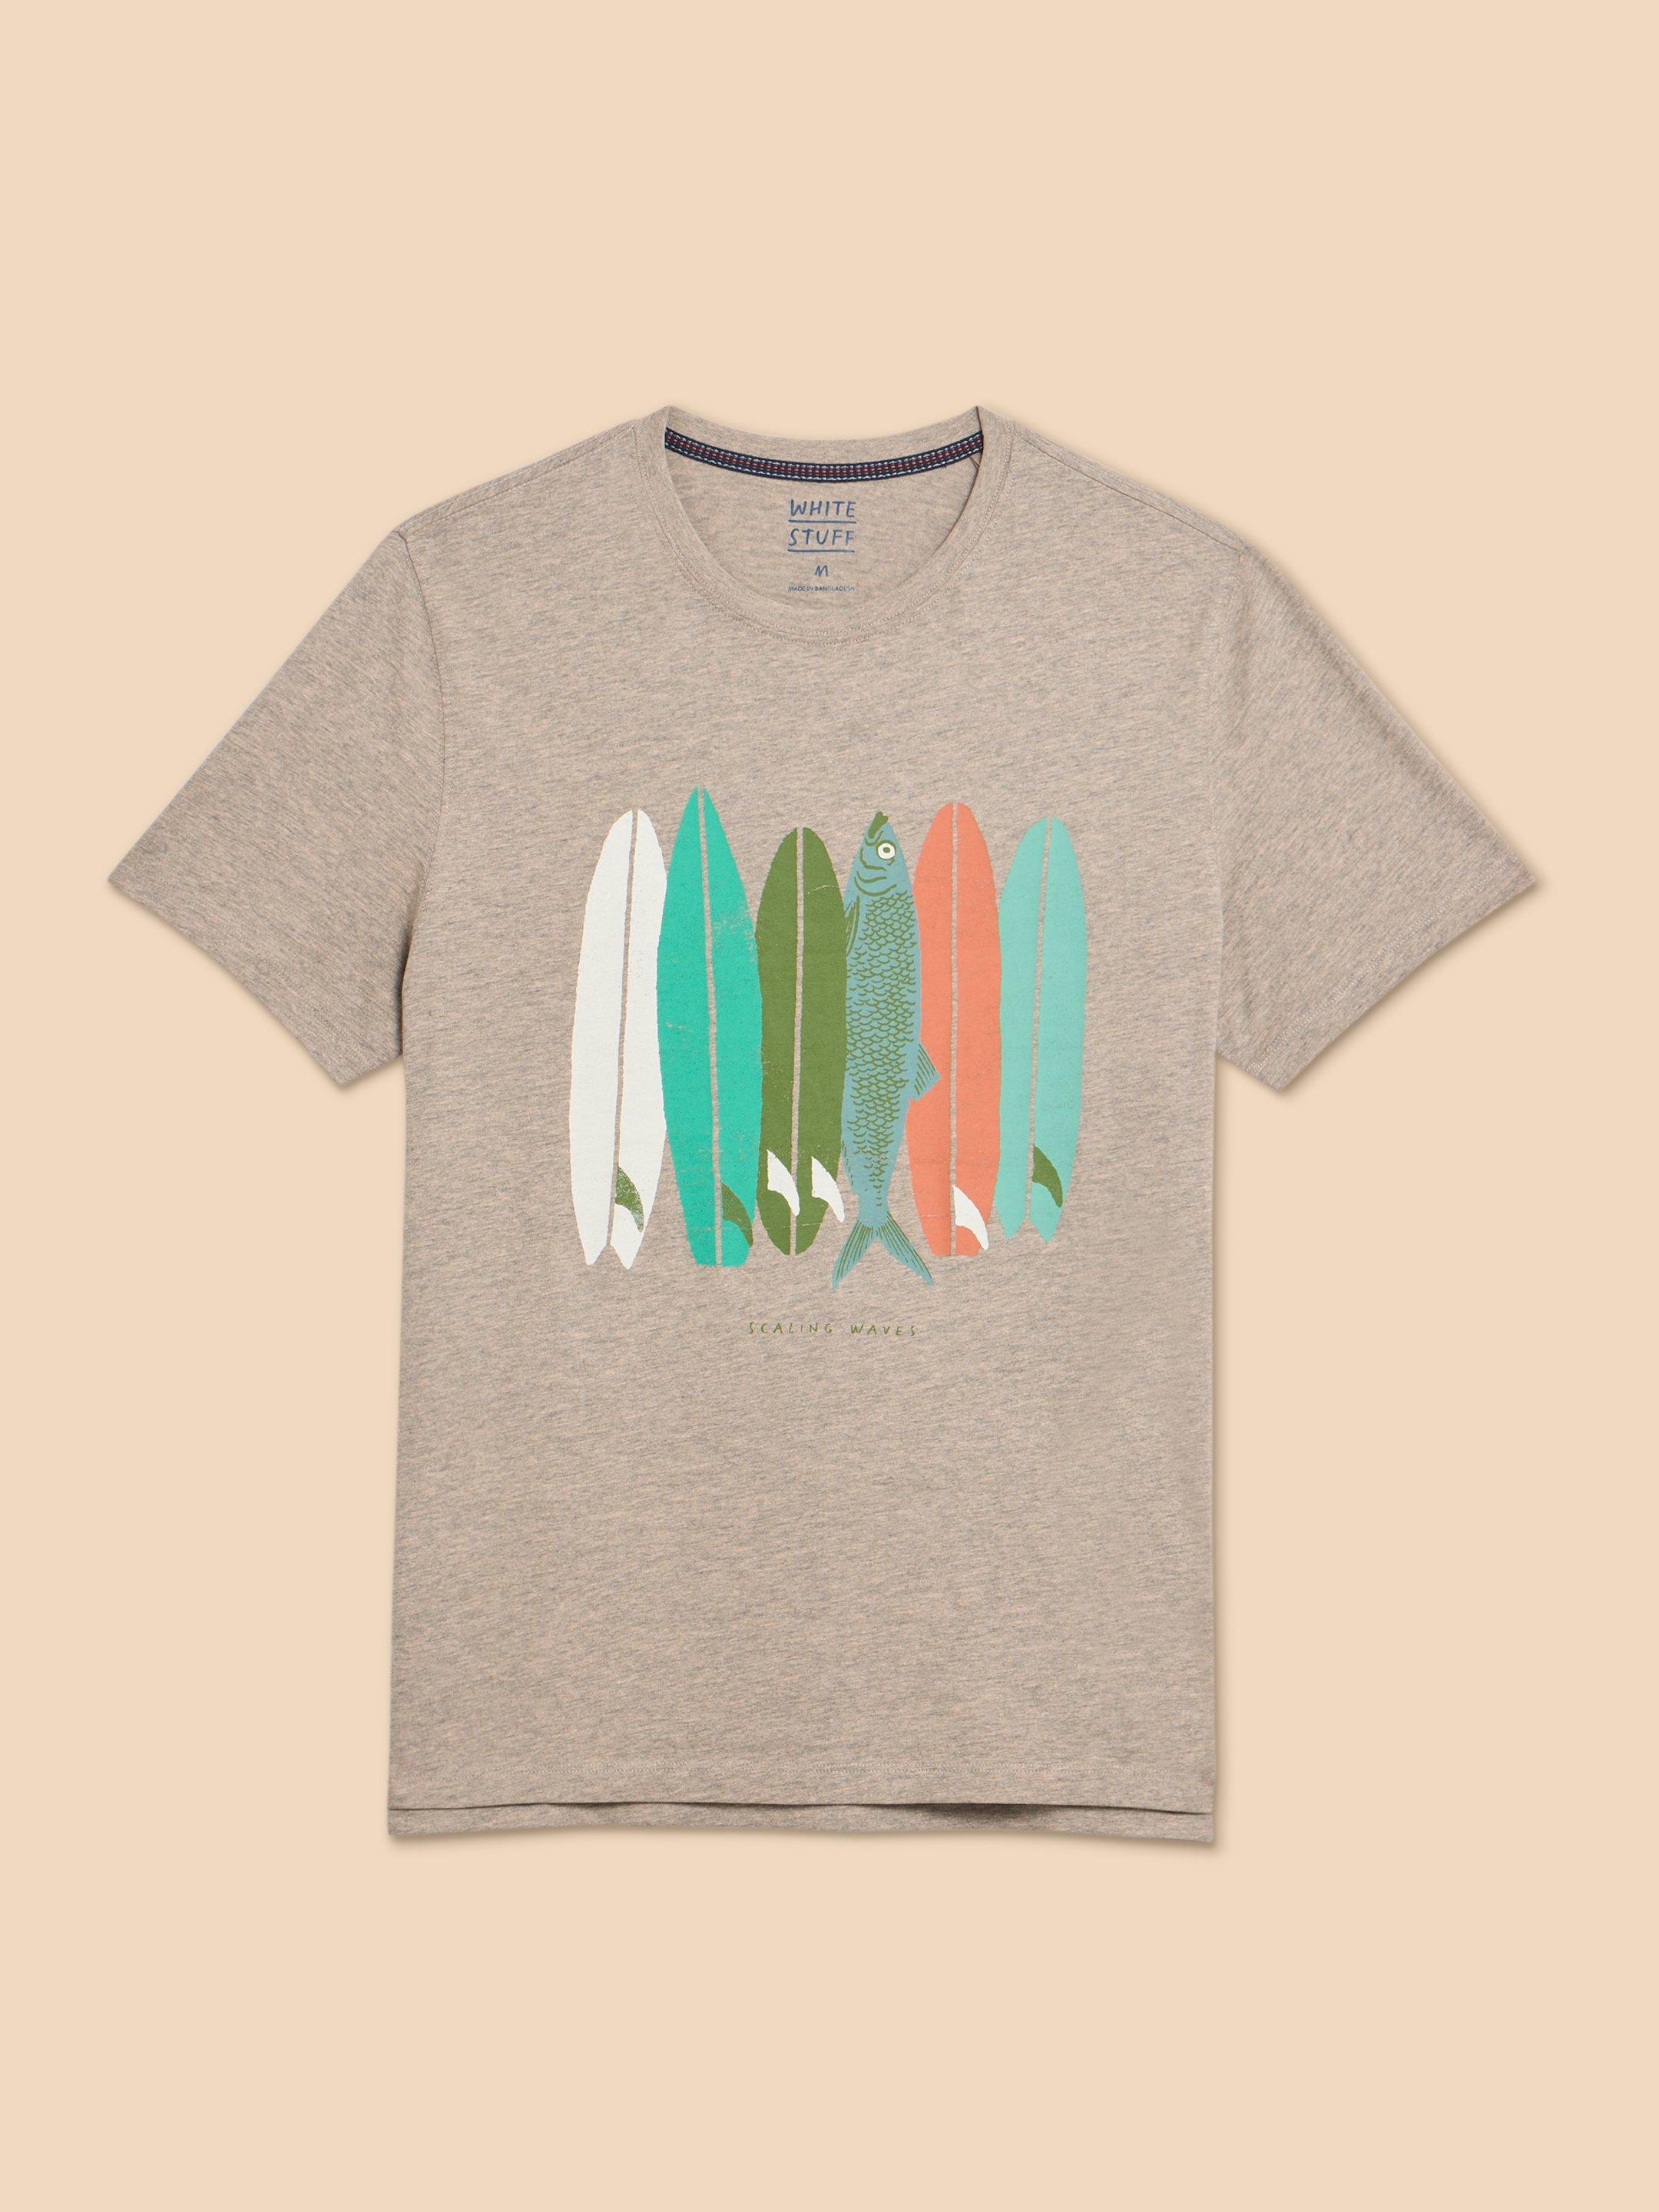 Scaling Waves Graphic Tee in GREY PR - FLAT FRONT